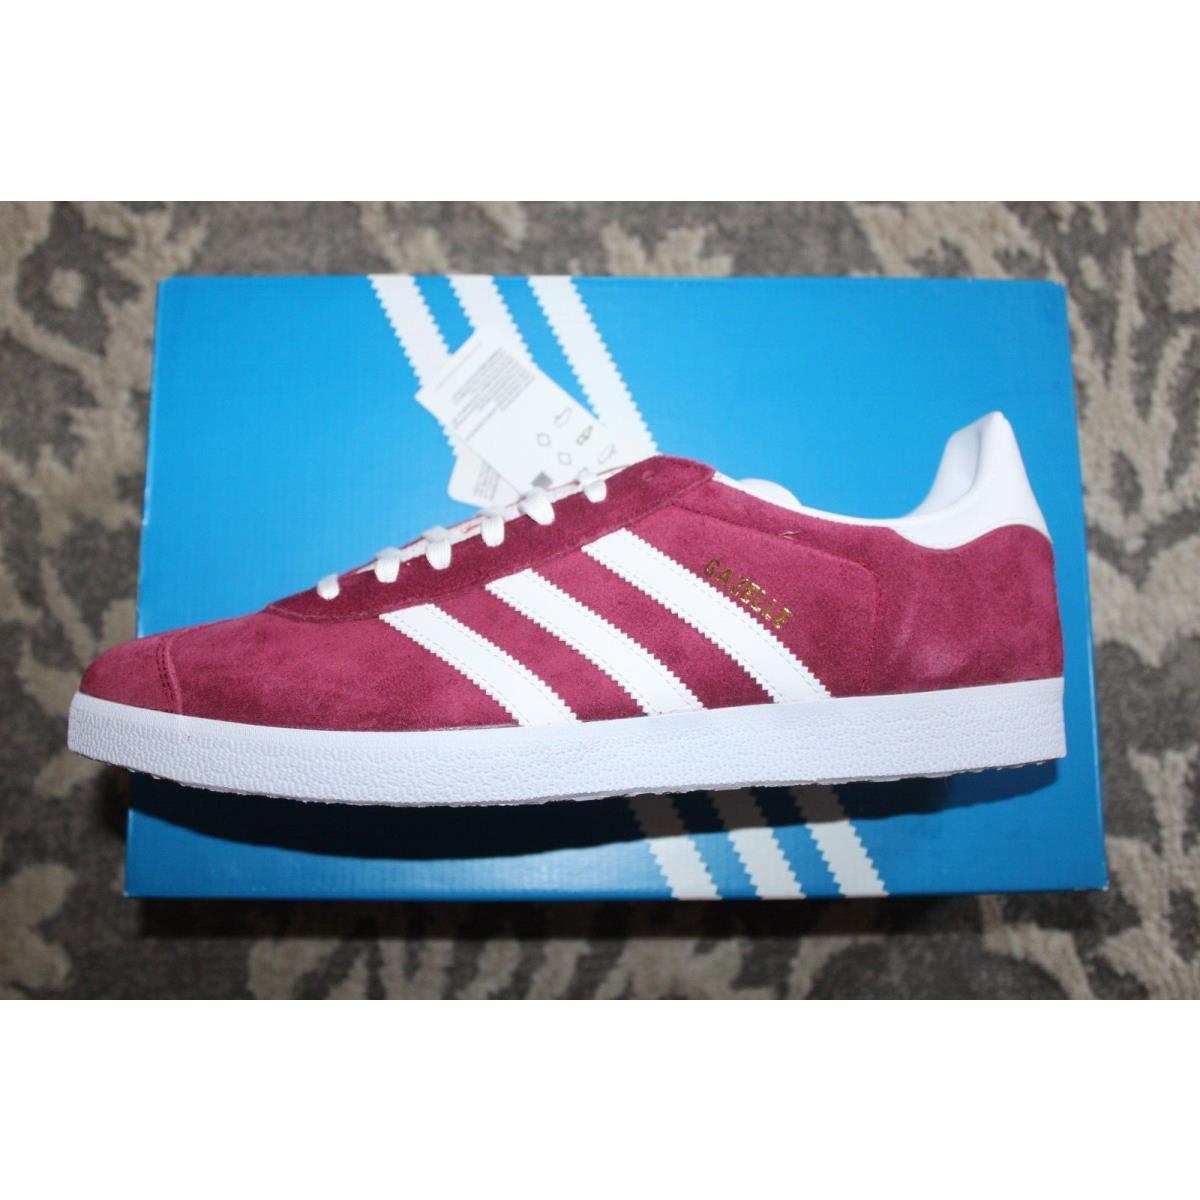 Adidas shoes Gazelle - Red 1